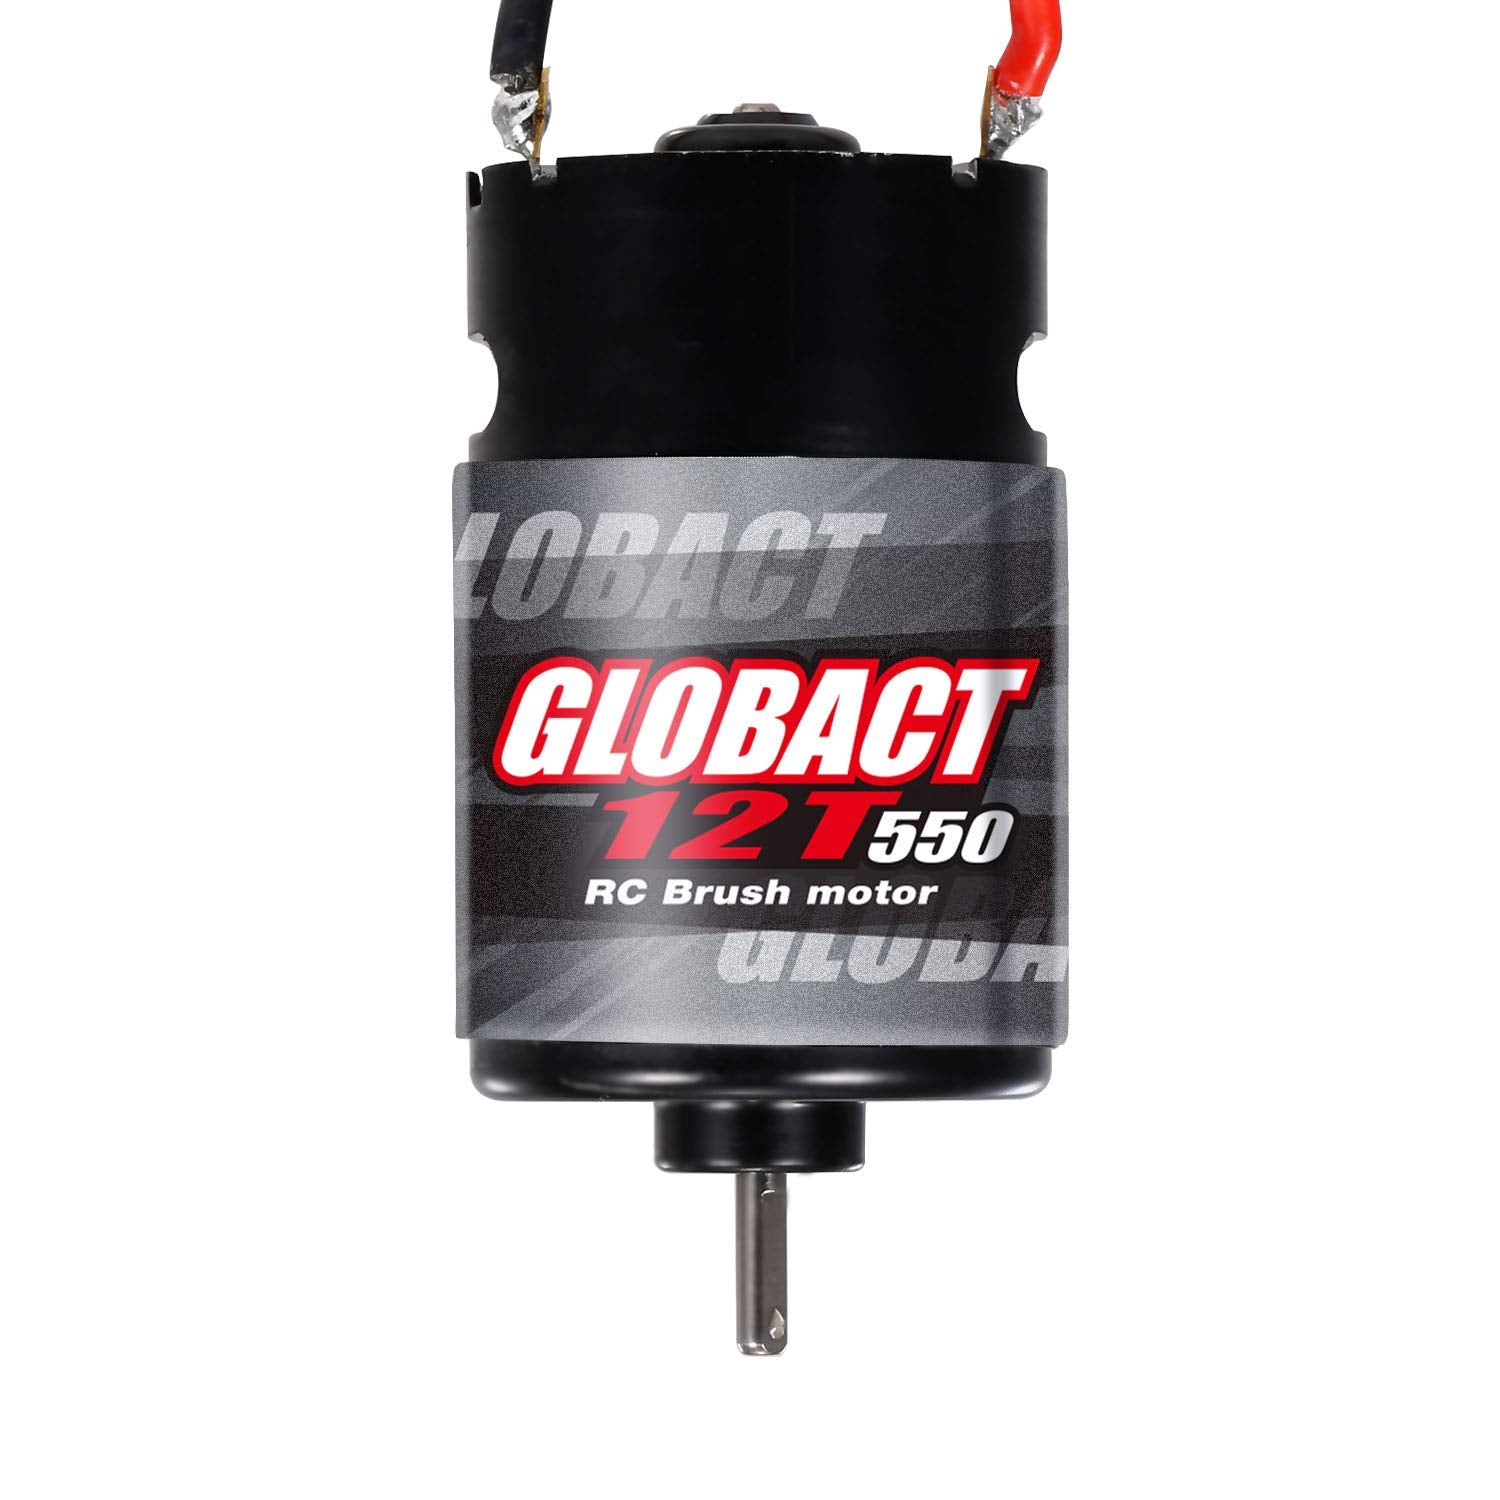 Globact Rc Motor 550 12T Brushed Motor for 1/10 RC Scale Electric Short Course Truck car Slash 2WD/4WD Redcat ARRMA AXIAL HSP HPI Wltoys Kyosho HELION 10SC